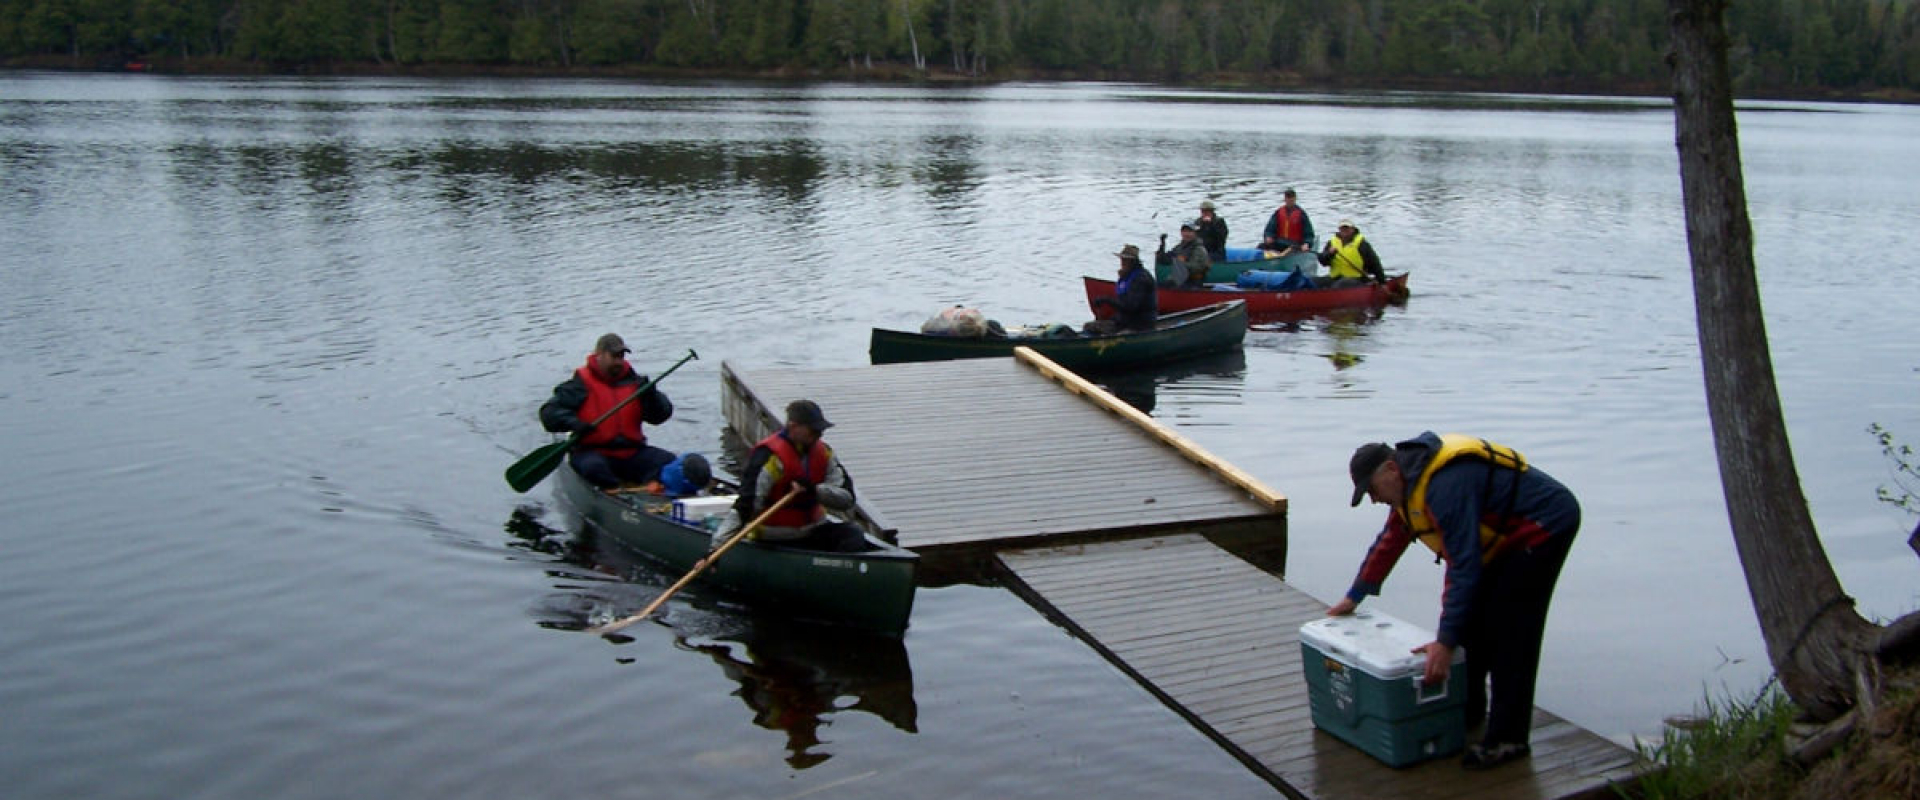 Canoeists dock their canoes at  the Loon Bay launch while others paddle nearby on the water. 